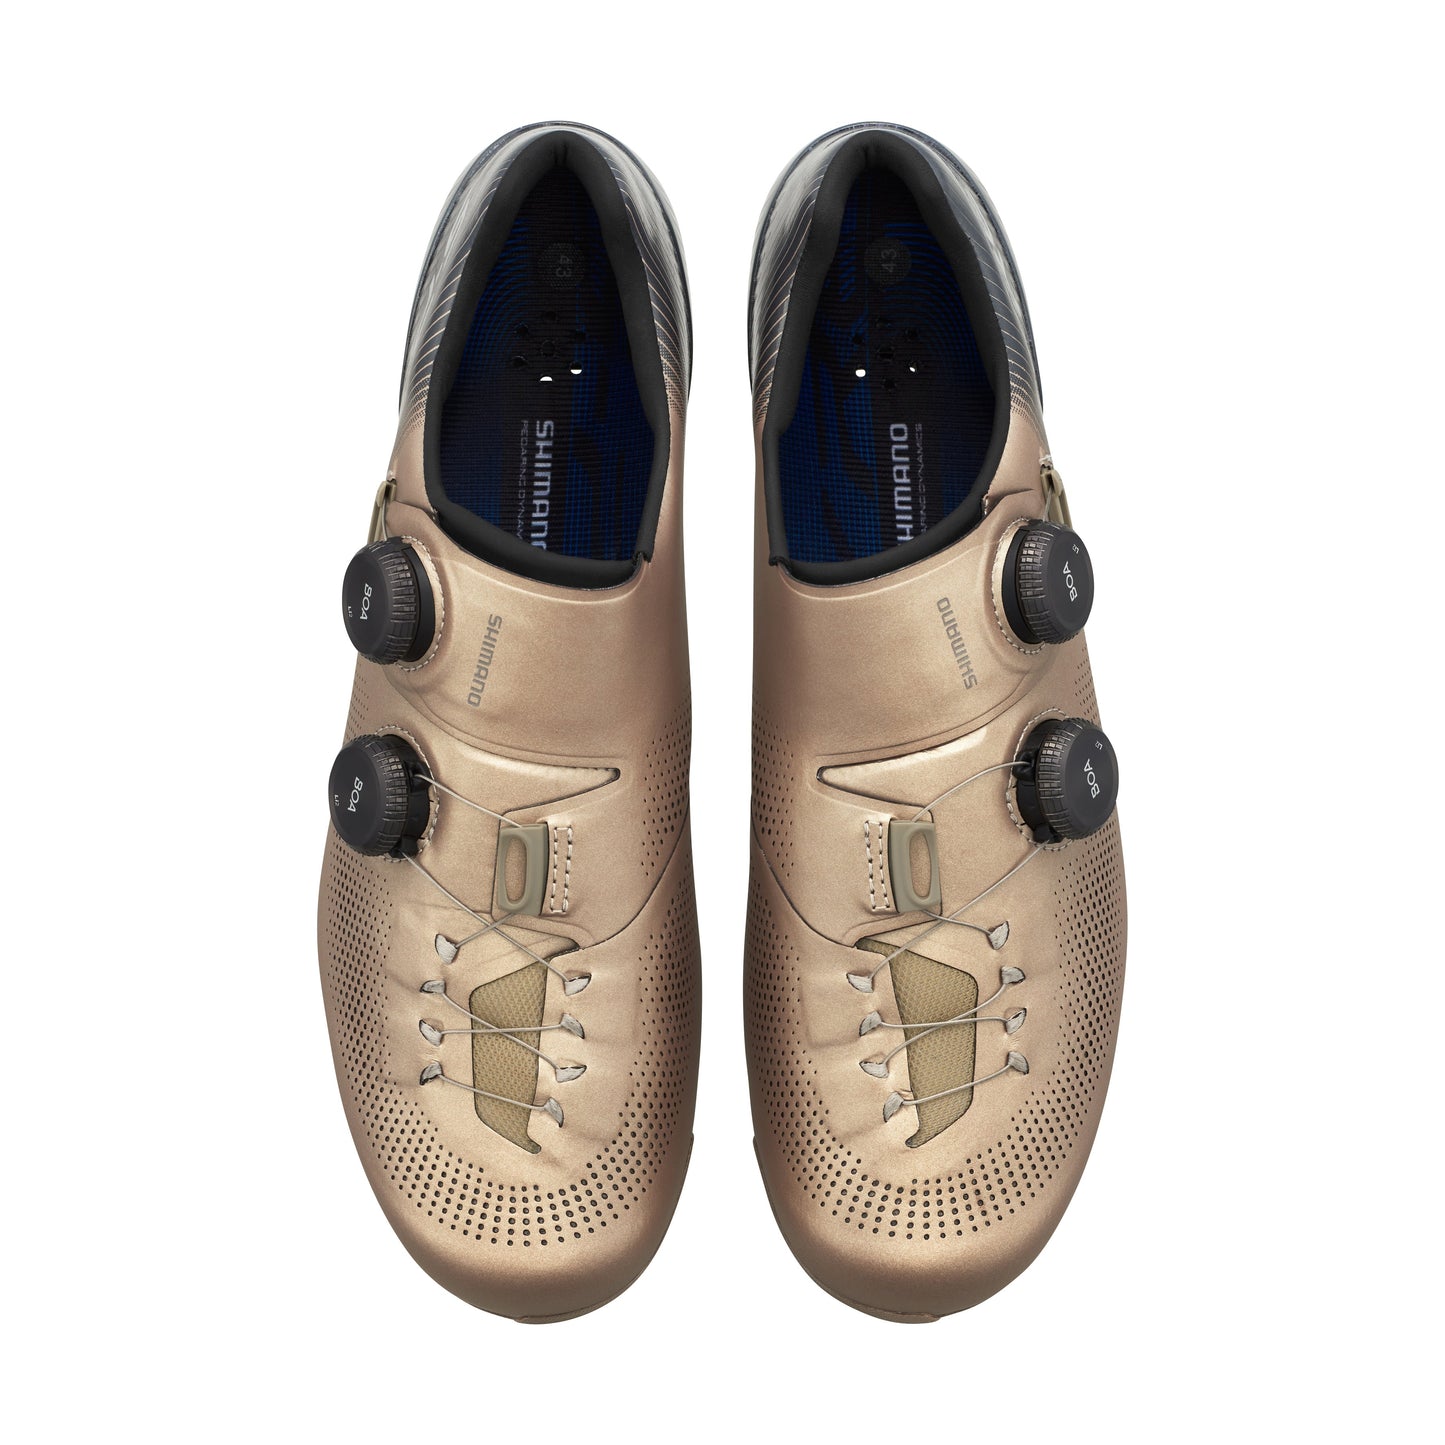 SHIMANO SH-RC903S road shoes-wide-limited edition champagne gold black/SHIMANO SH-RC903S ROAD SHOES-WIDE-GOLD/BLACK